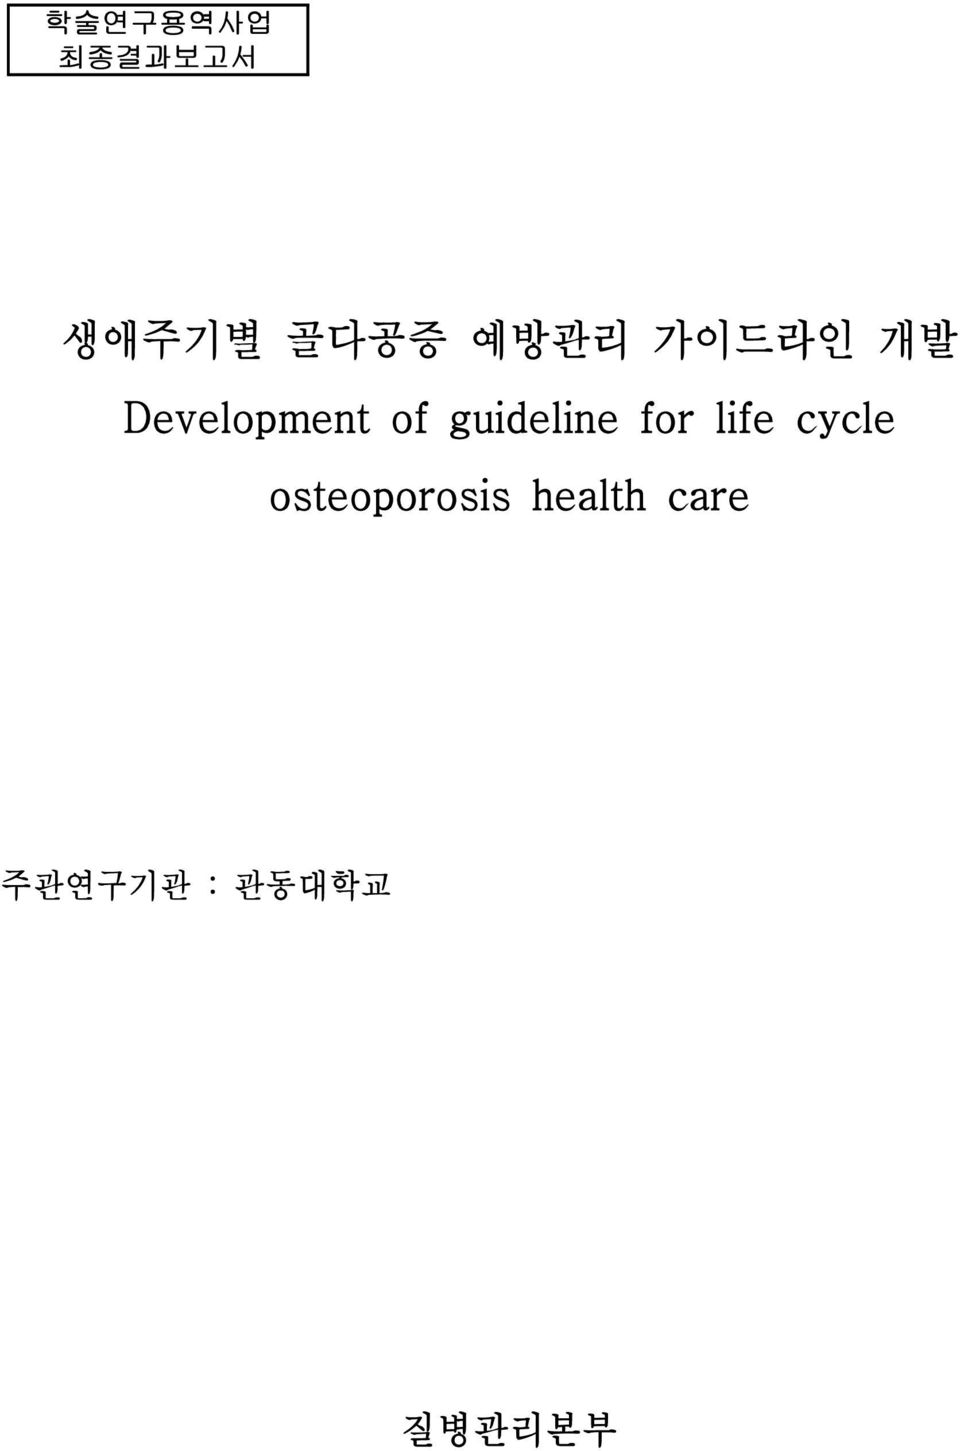 guideline for life cycle